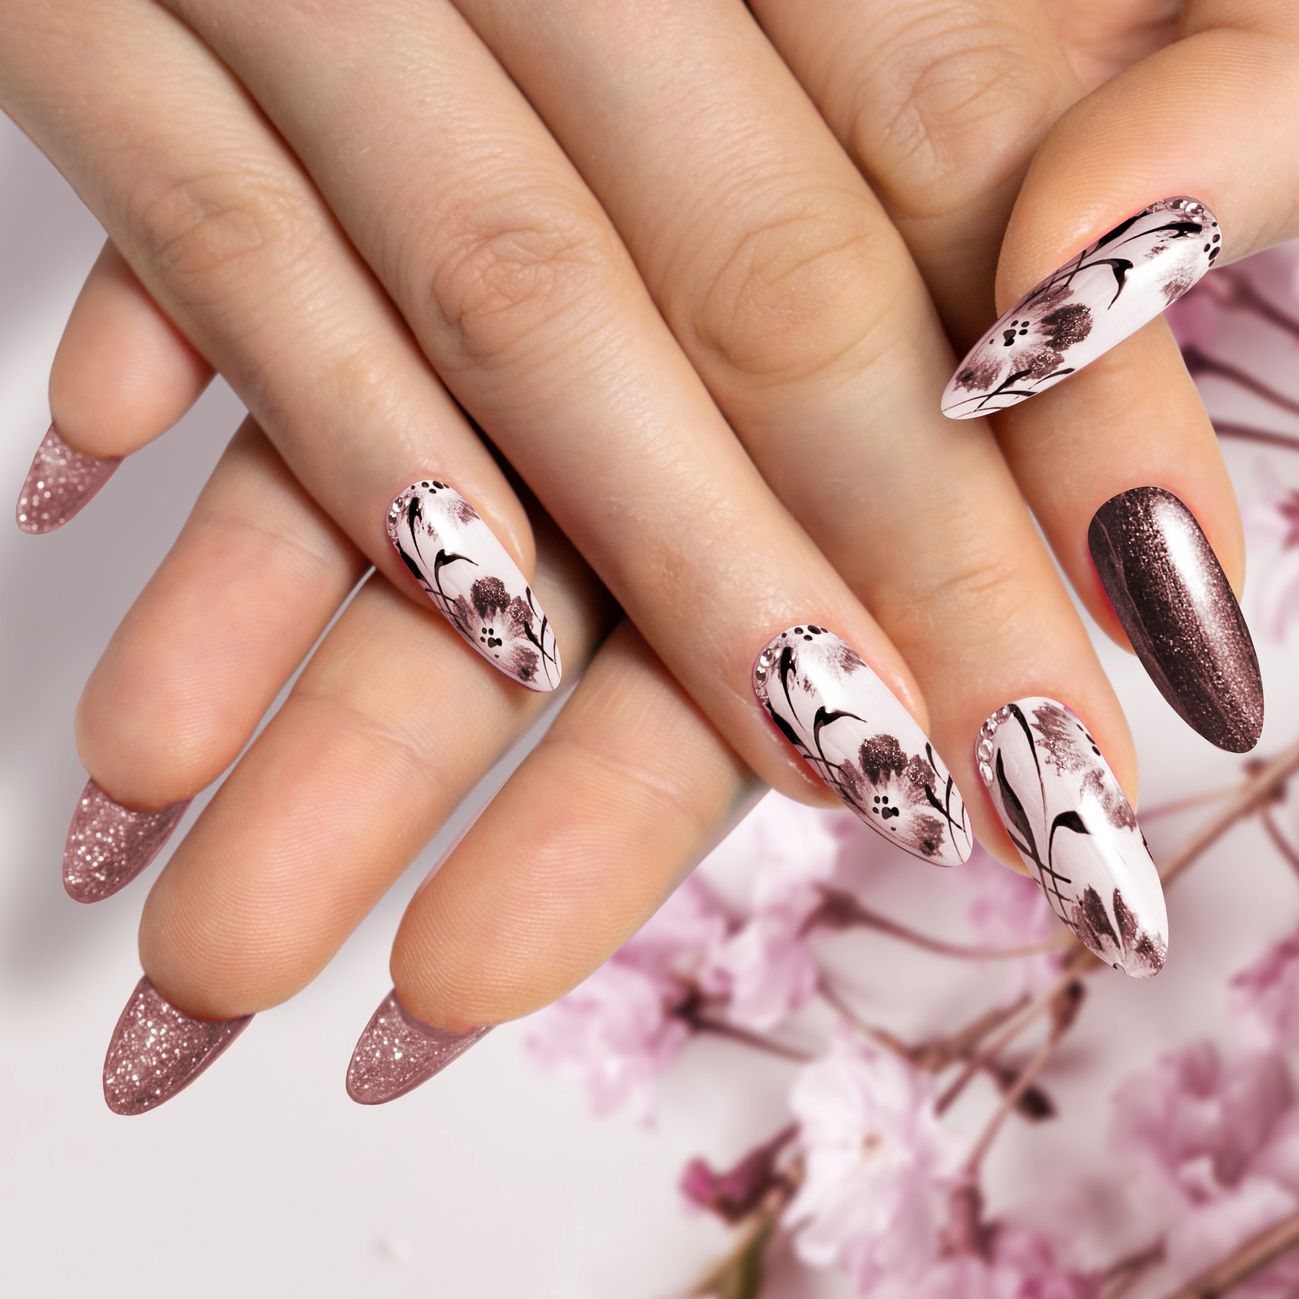 nail designs with crosses on them